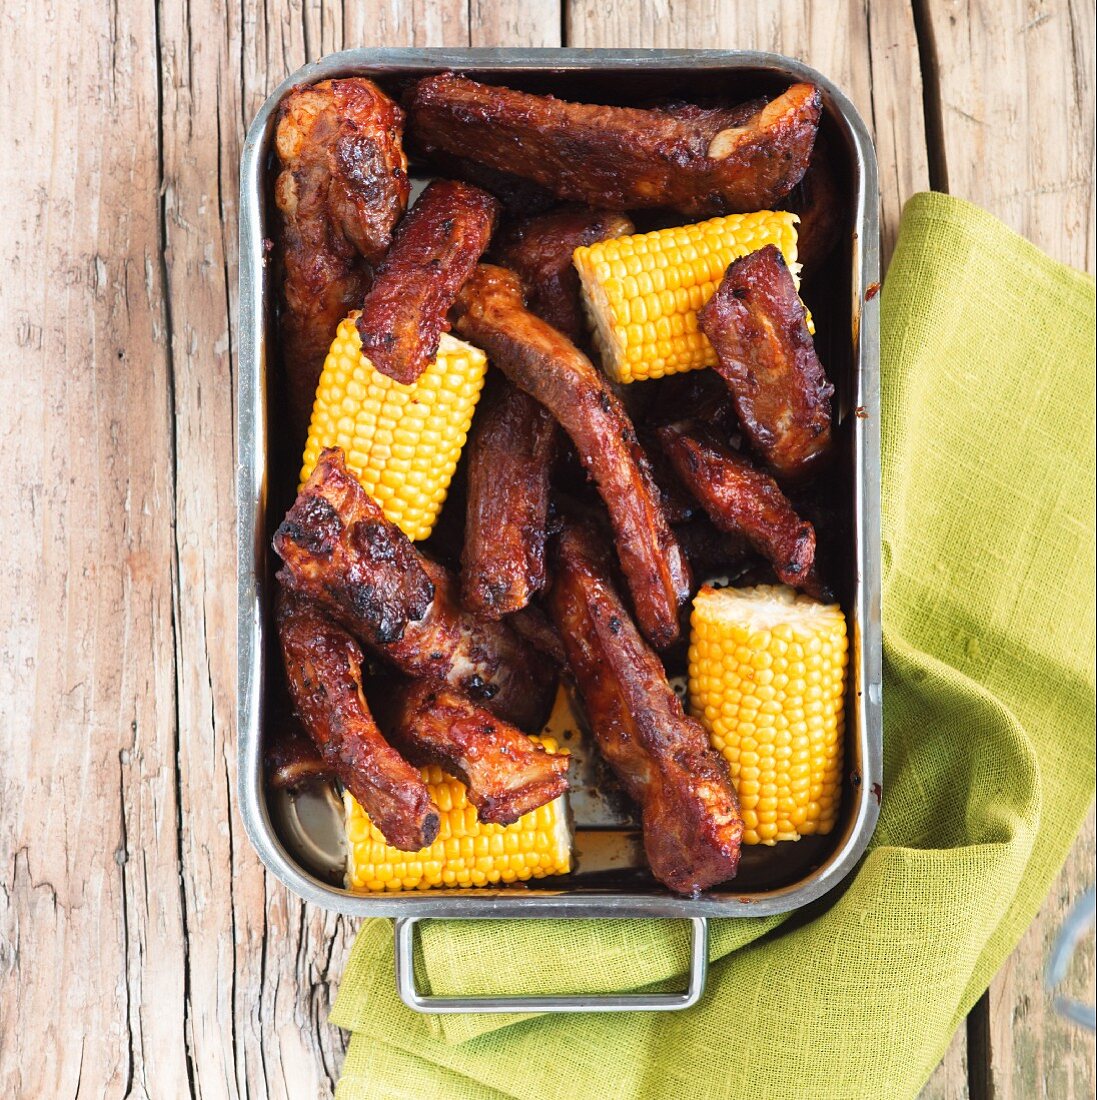 Grilled ribs with corn cobs